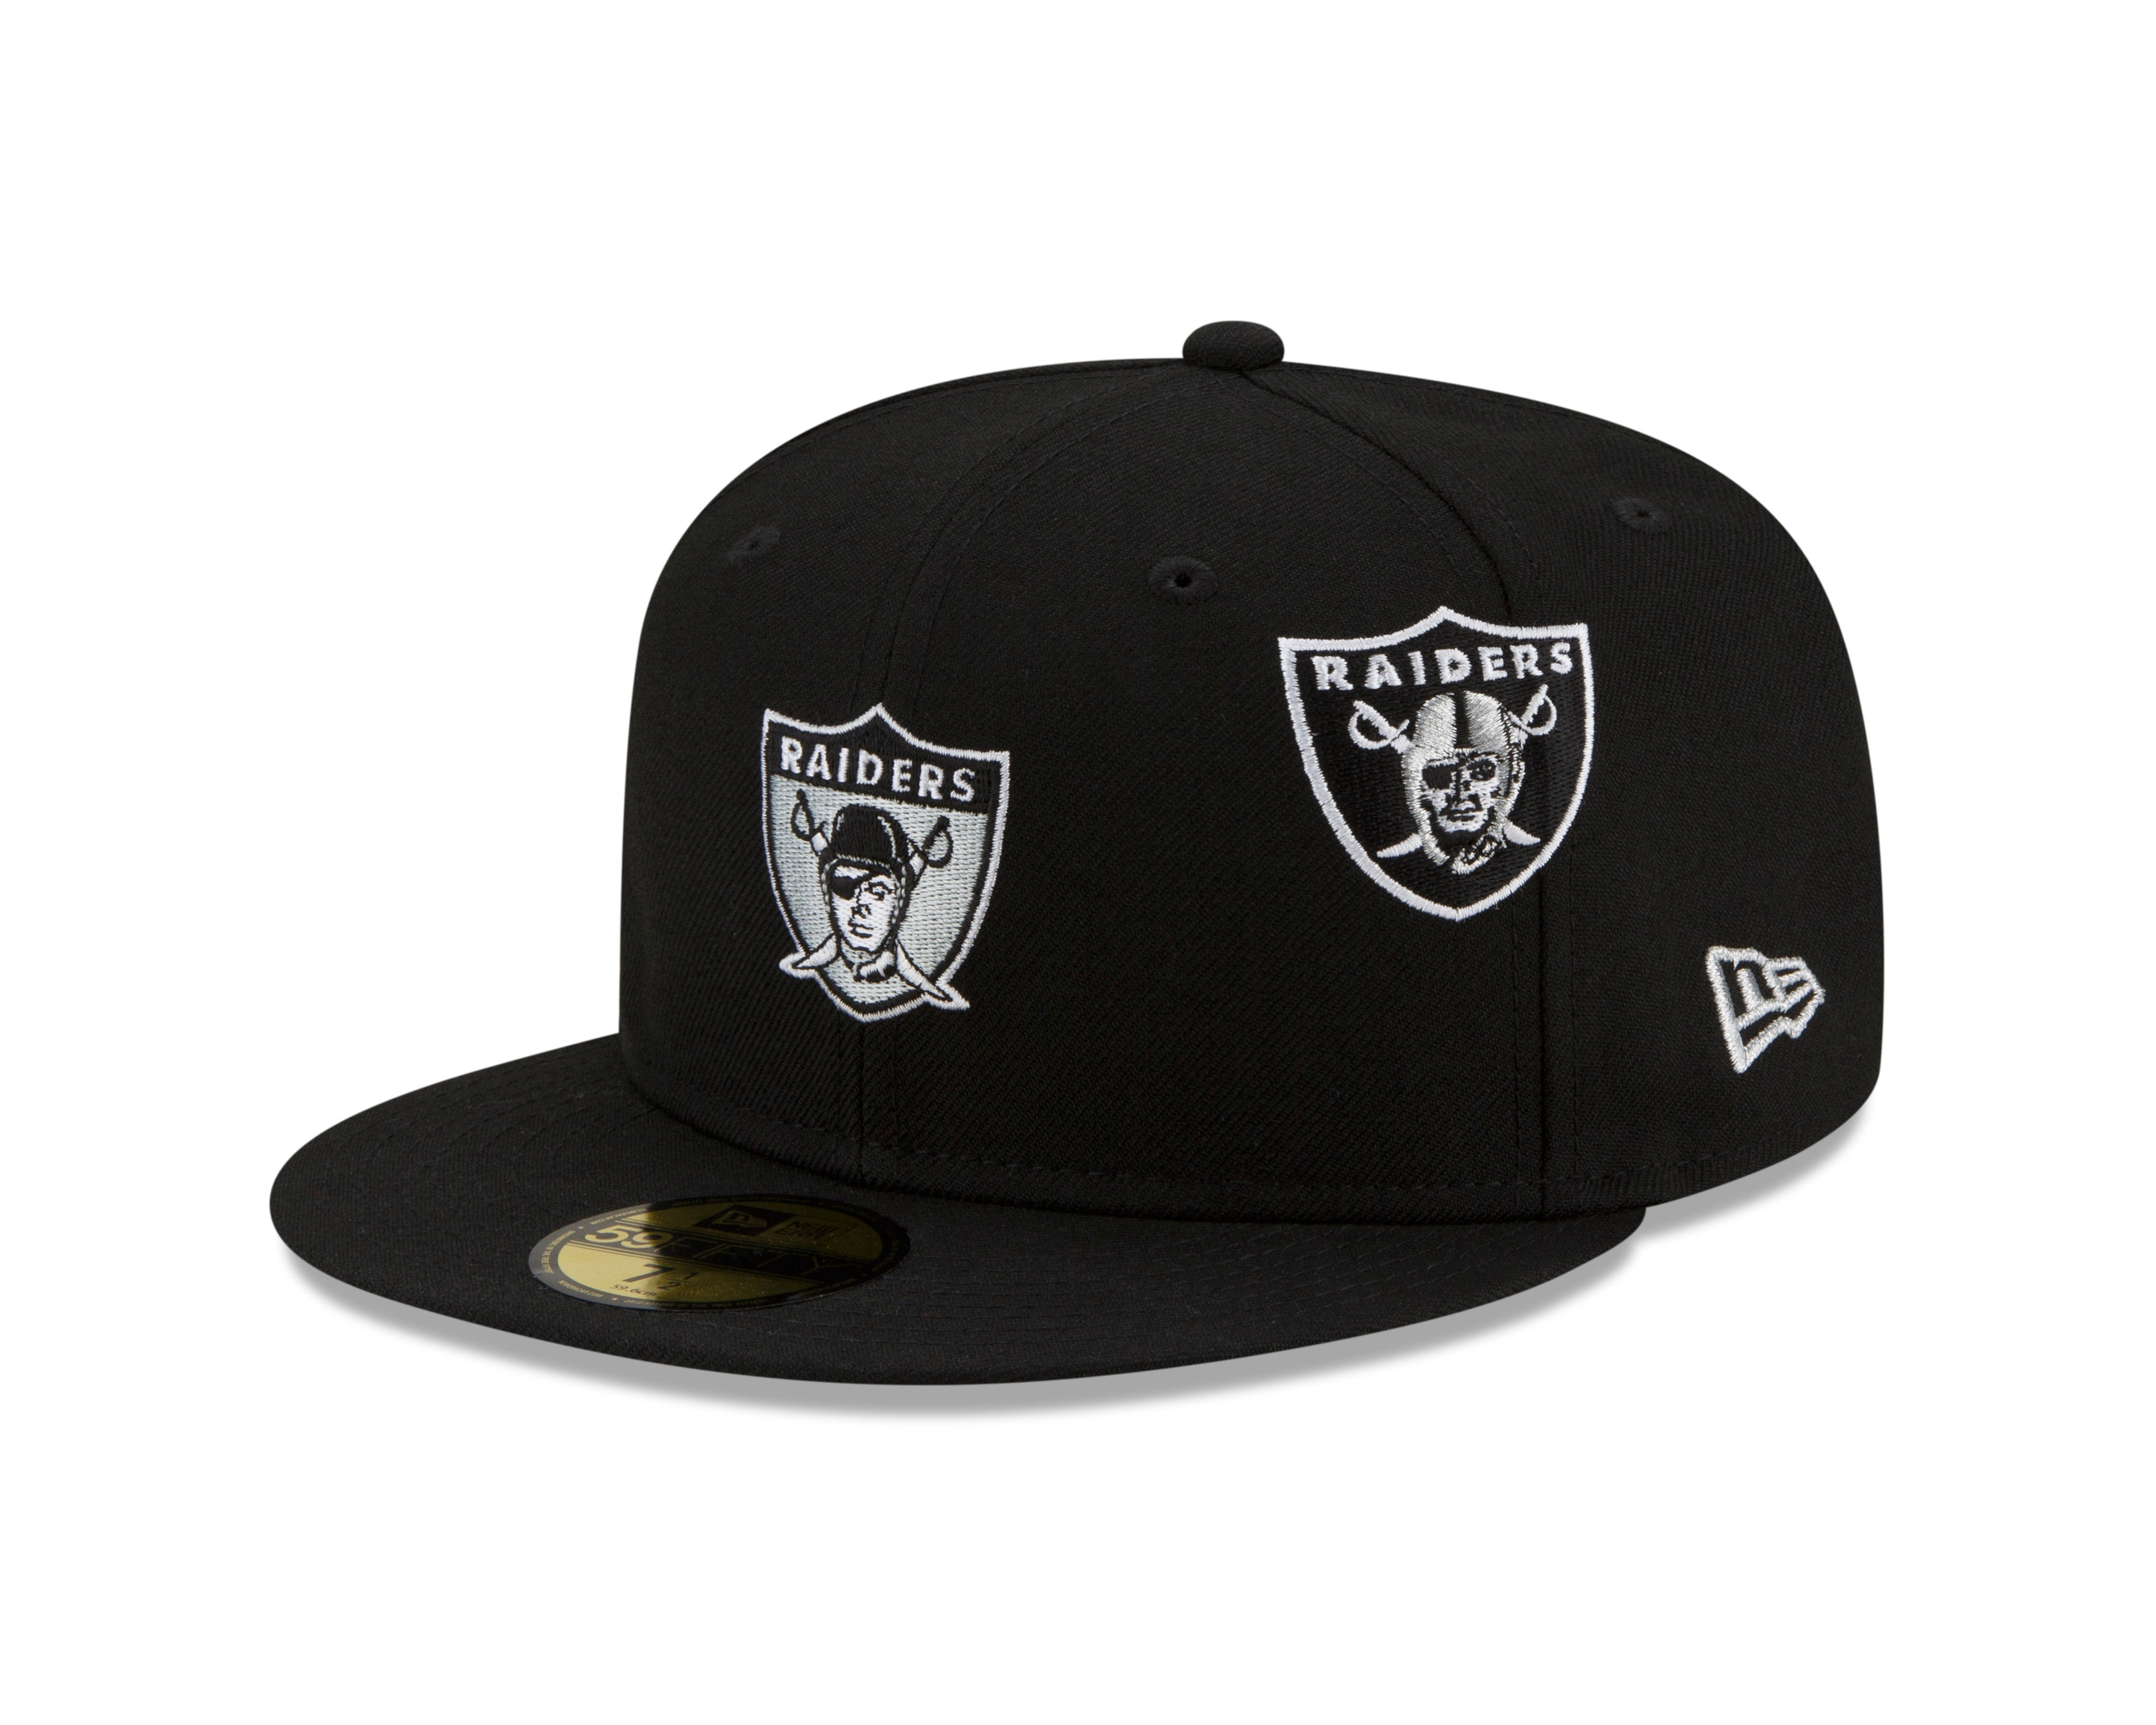 New Era Flat Brim 59FIFTY Championships Las Vegas Raiders NFL White and  Black Fitted Cap